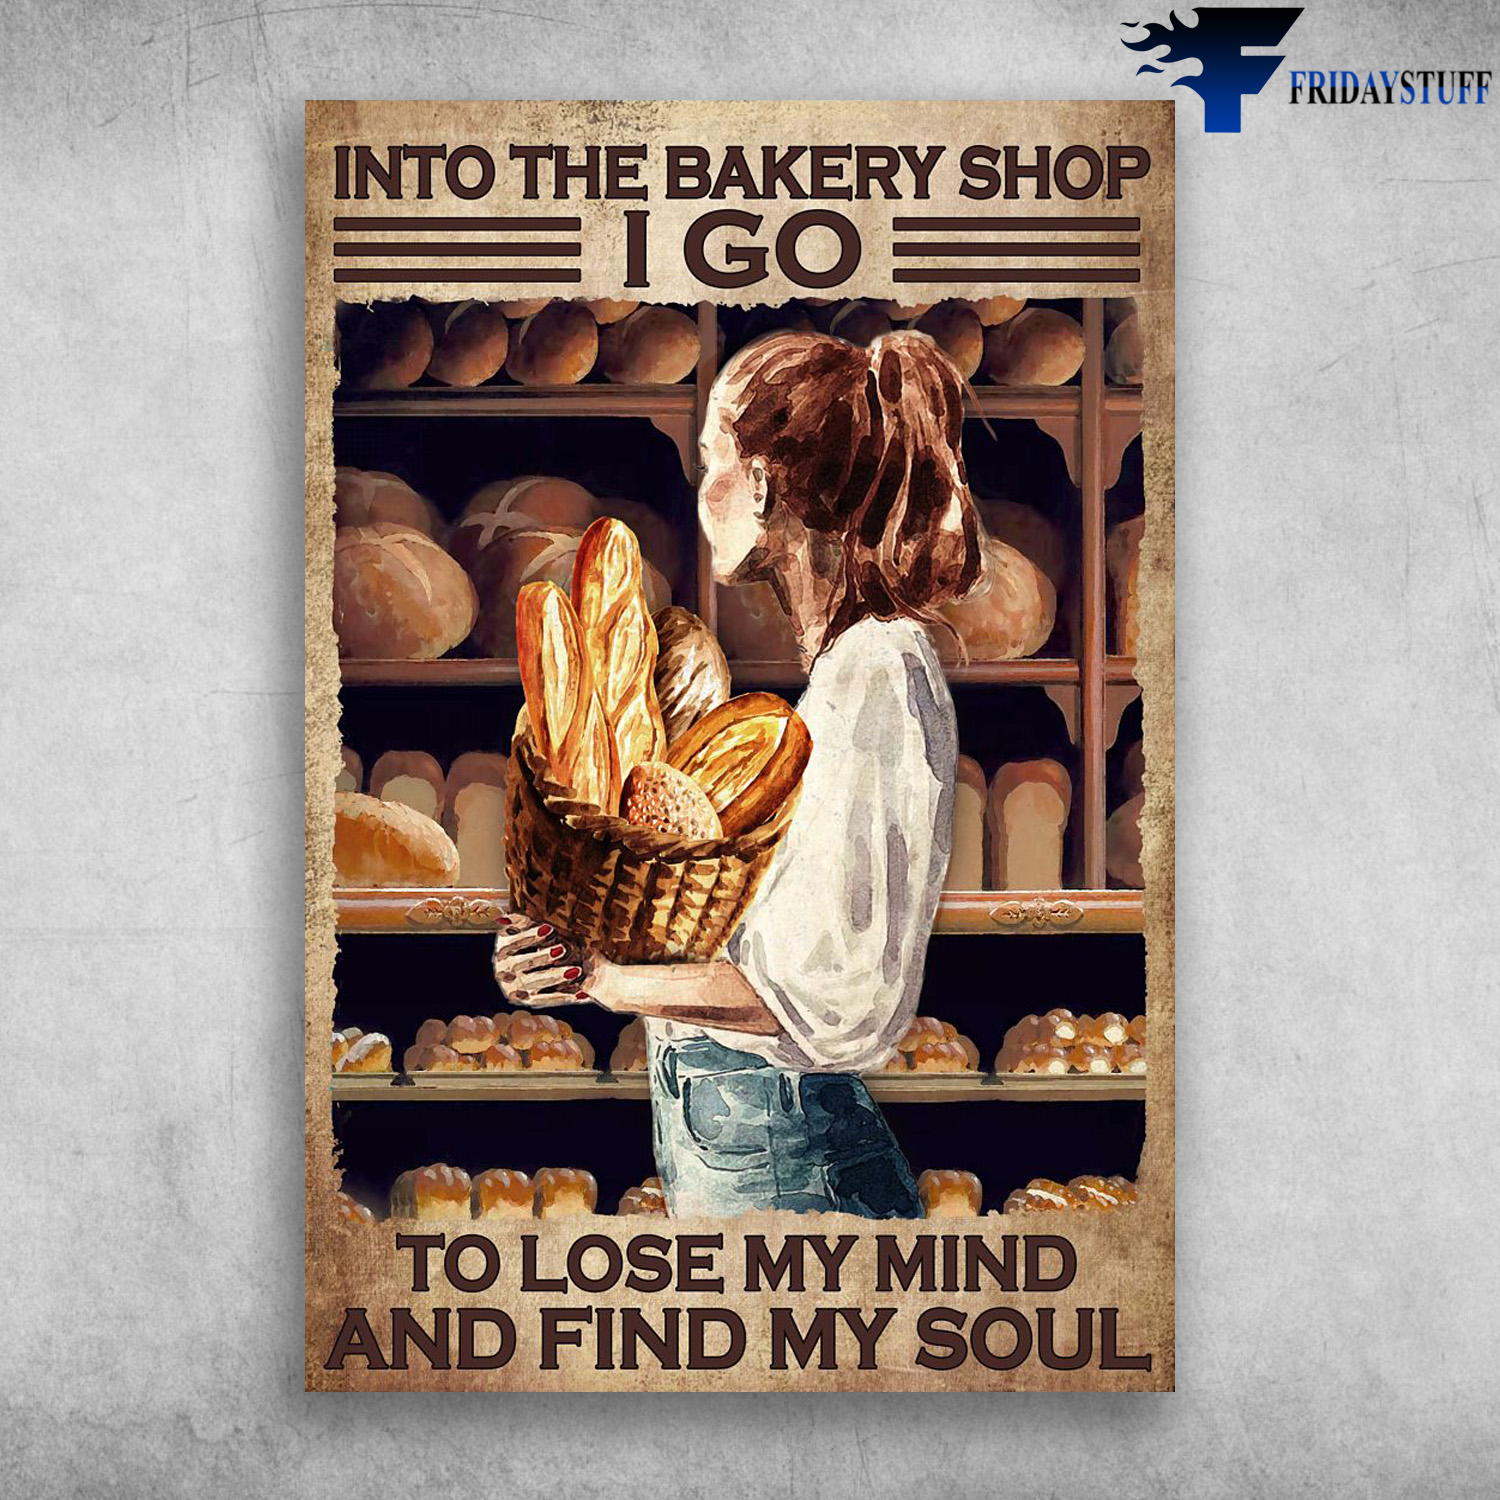 Girl And Bread - Into The Bakery Shop, I Go To Lose My Mind, And Find My Soul